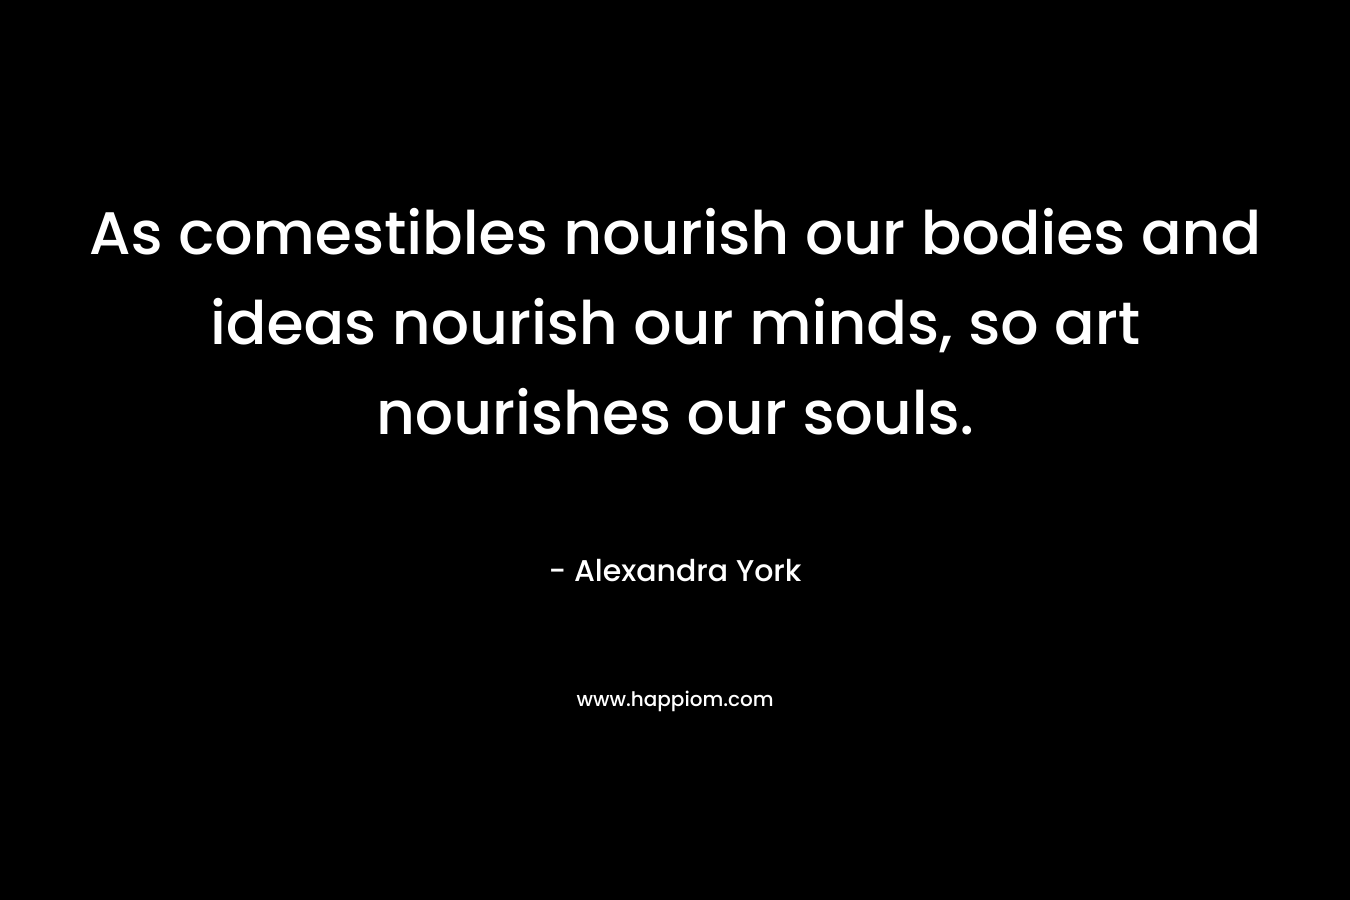 As comestibles nourish our bodies and ideas nourish our minds, so art nourishes our souls.